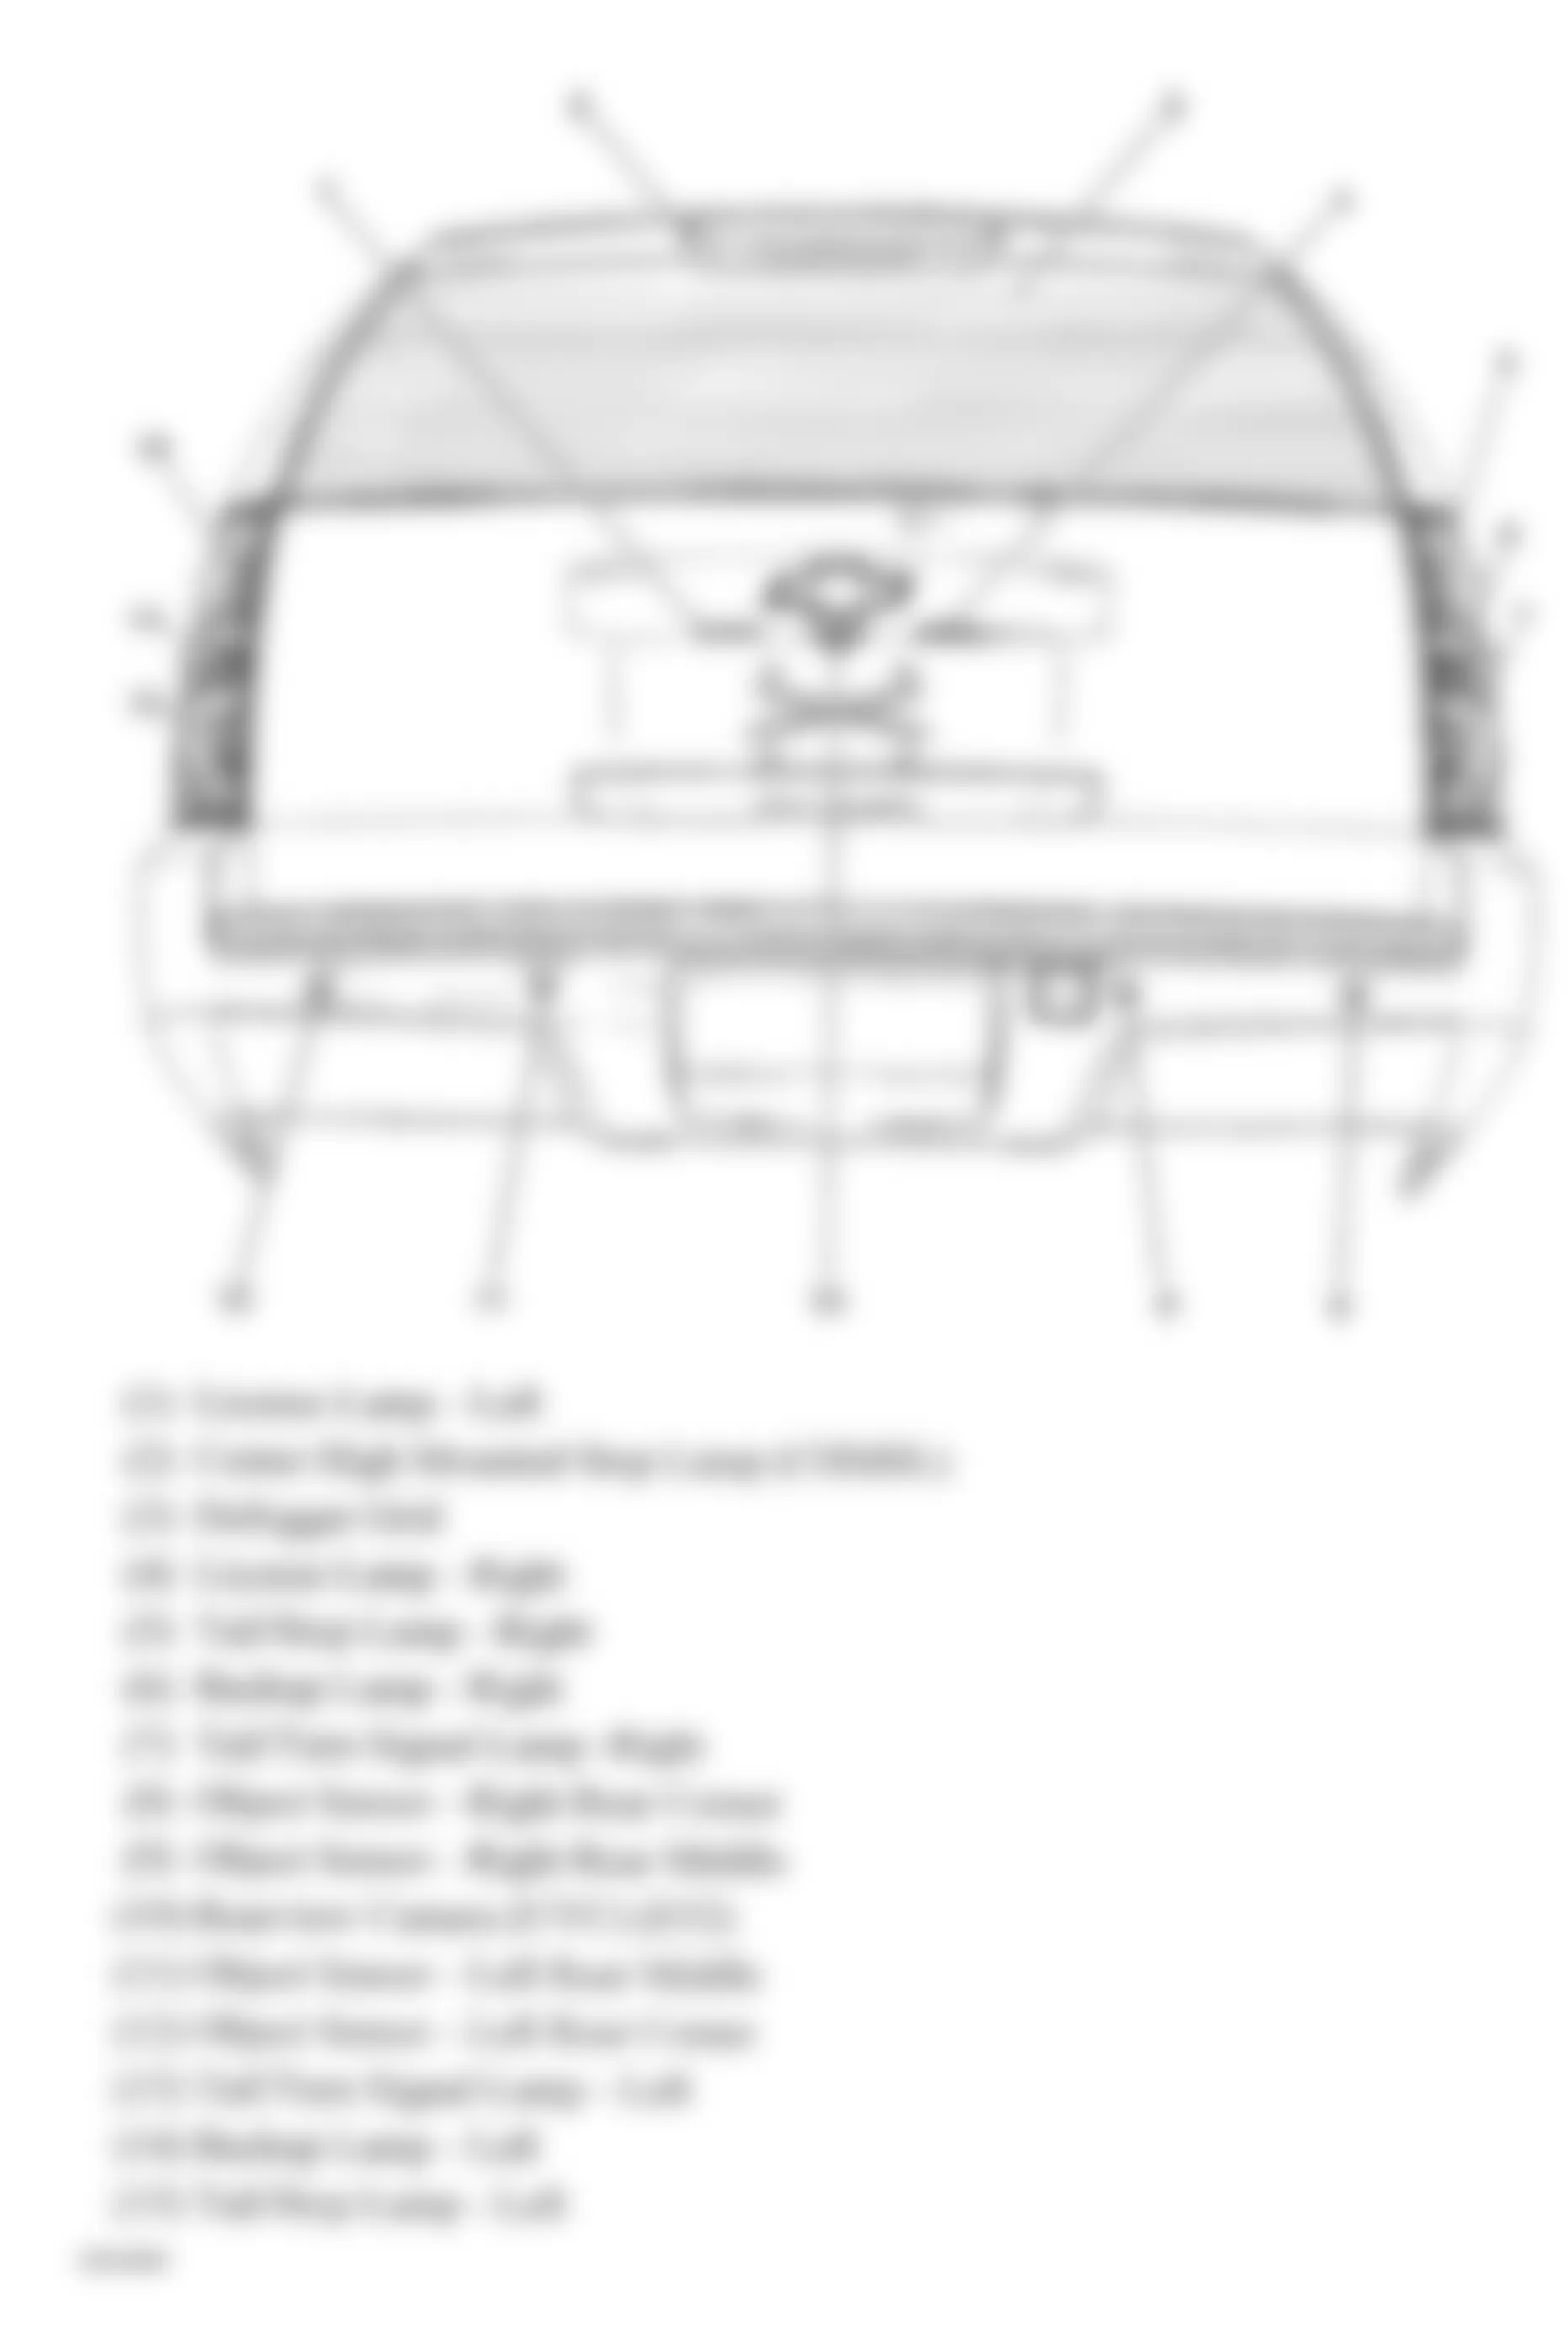 Chevrolet Tahoe 2008 - Component Locations -  Rear Of Vehicle (Avalanche, Suburban & Tahoe W/One Piece Liftgate)